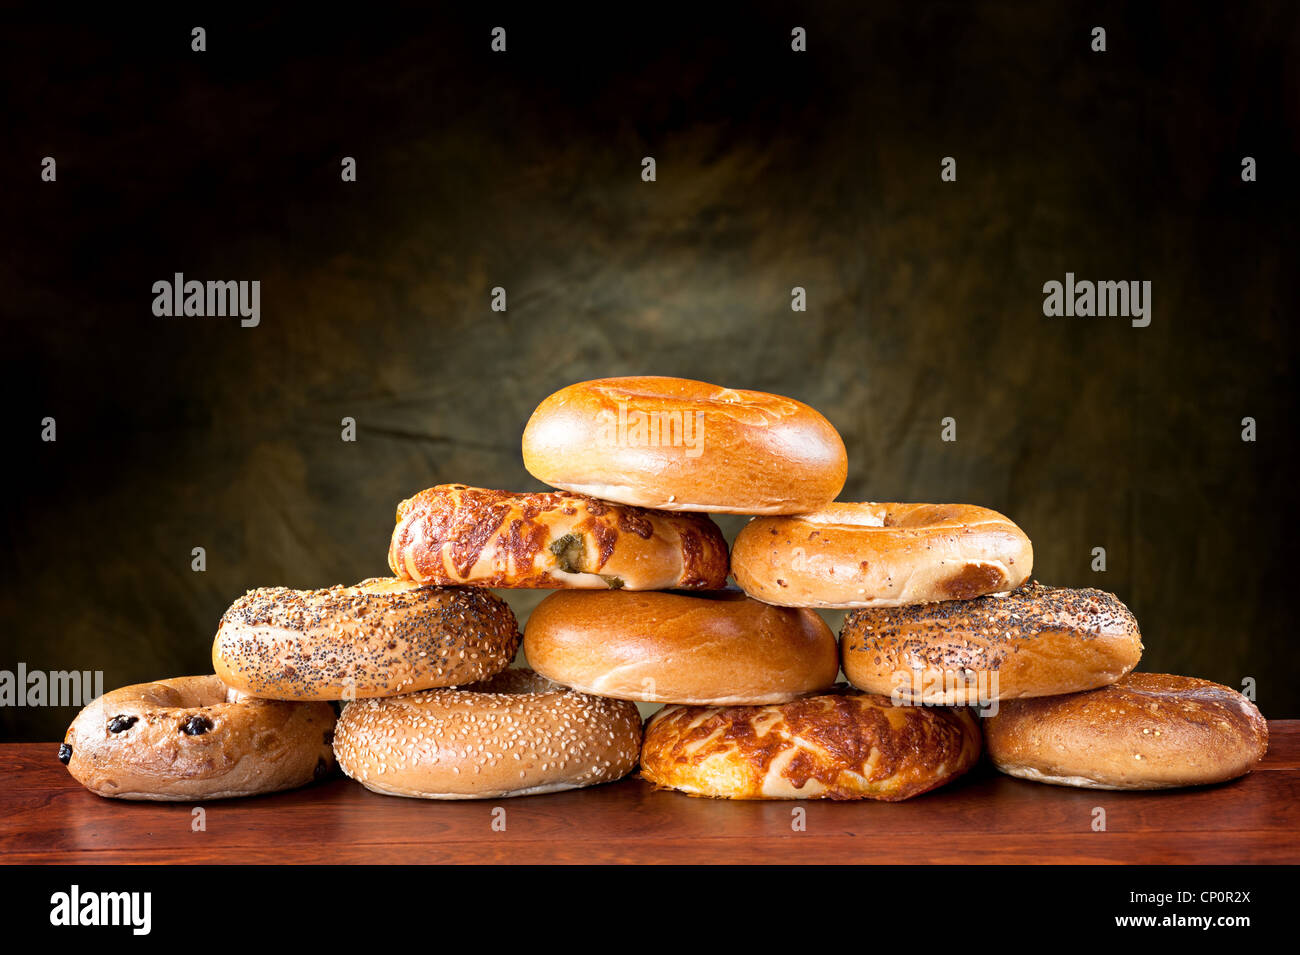 An assortment of flavored, seasoned breakfast bagels against a moody, green backdrop. Stock Photo